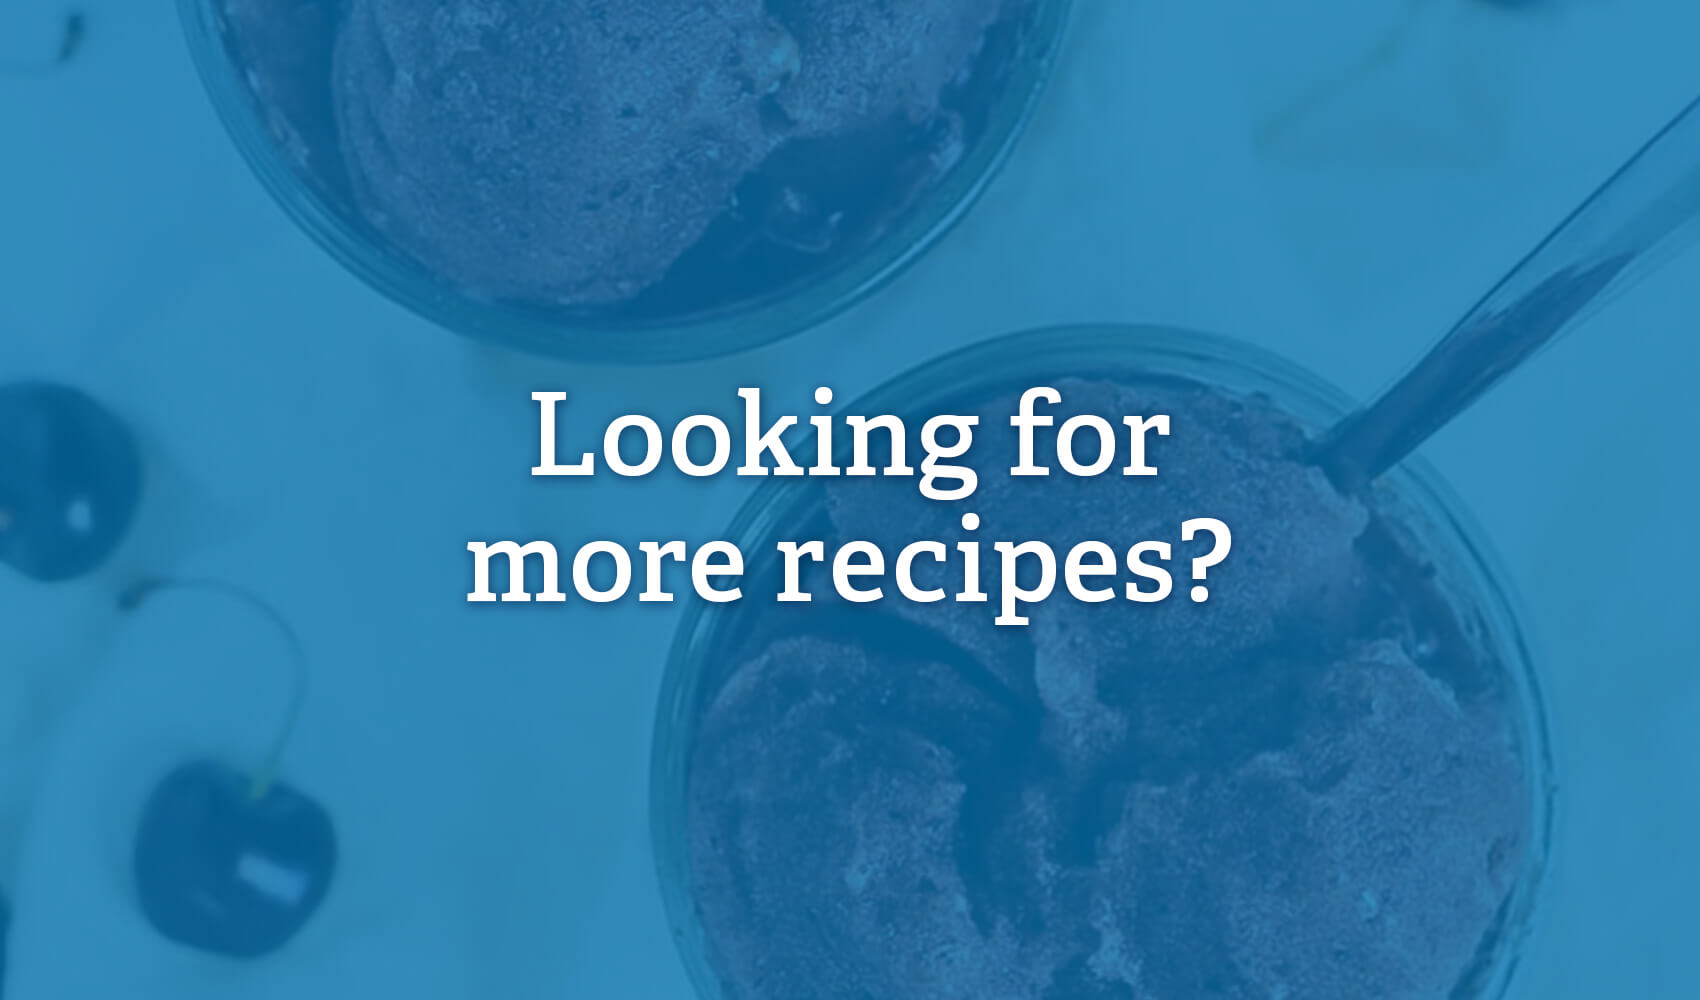 Check out our Recipe Roundup Series